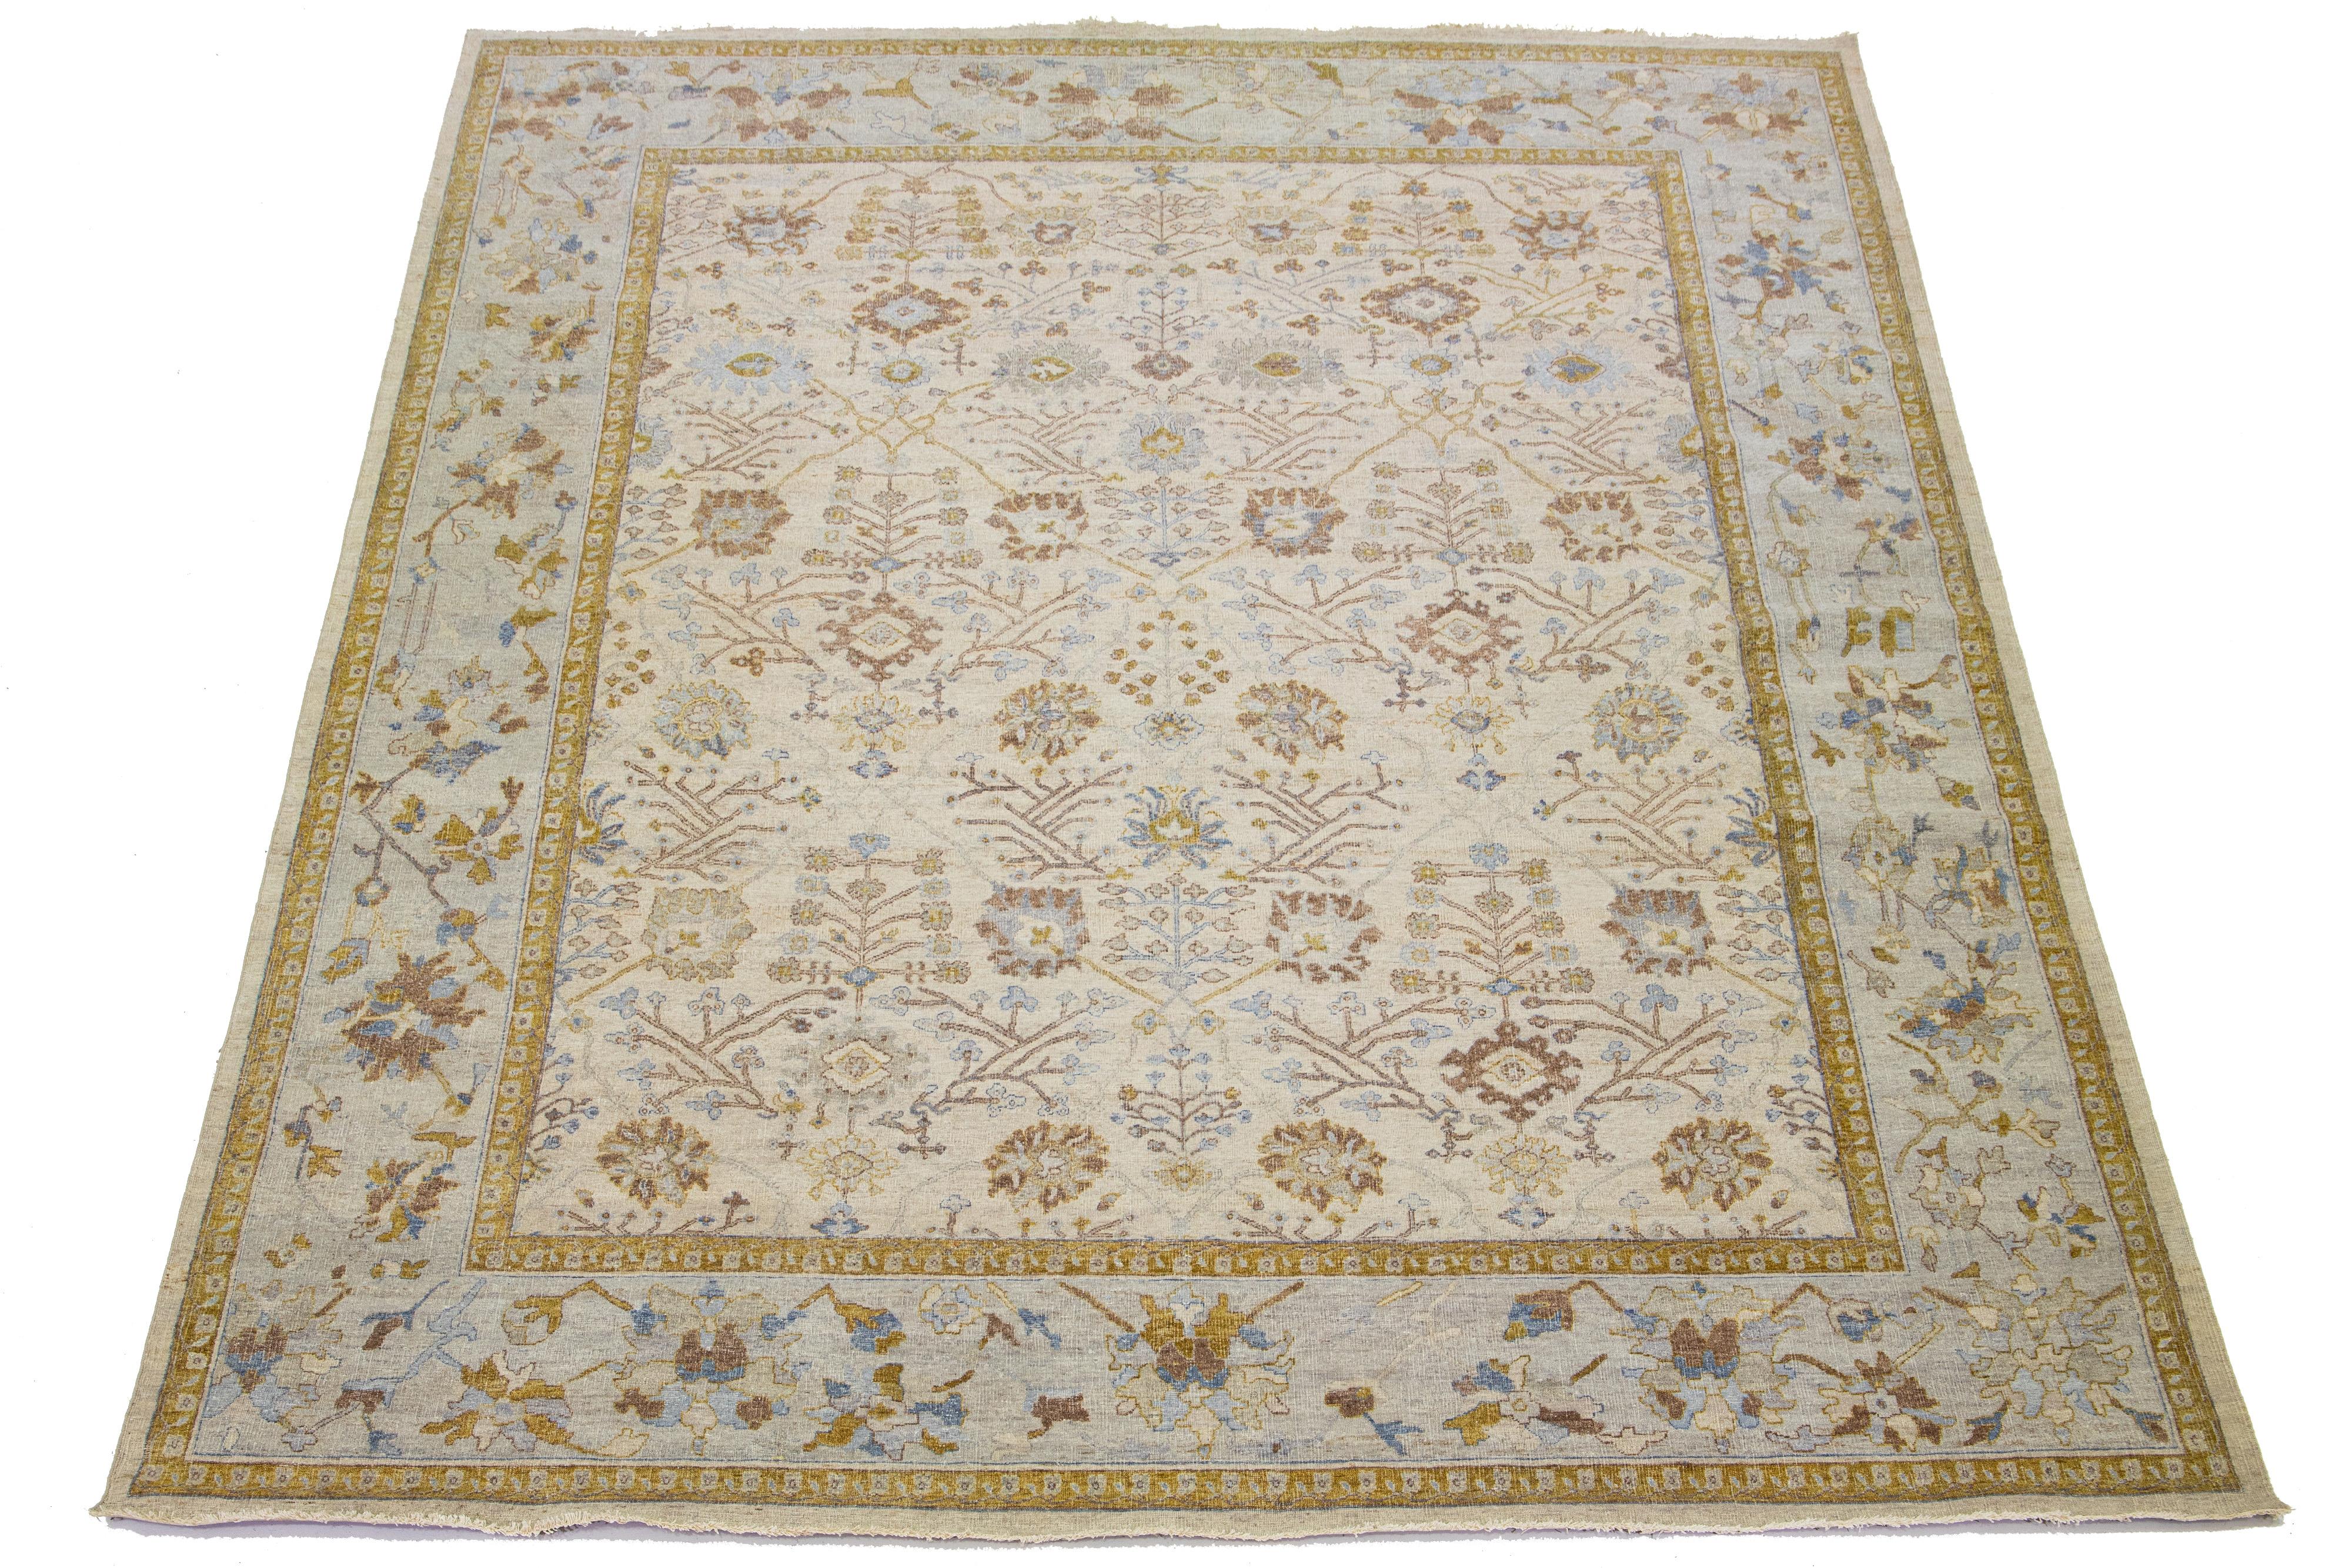 The Artisan line from Apadana brings a beautiful antique style to any space. This hand-knotted rug showcases a charming all-over floral pattern with a beige color scheme and gray, goldenrod, and brown accents. 

This rug measures 11' 11